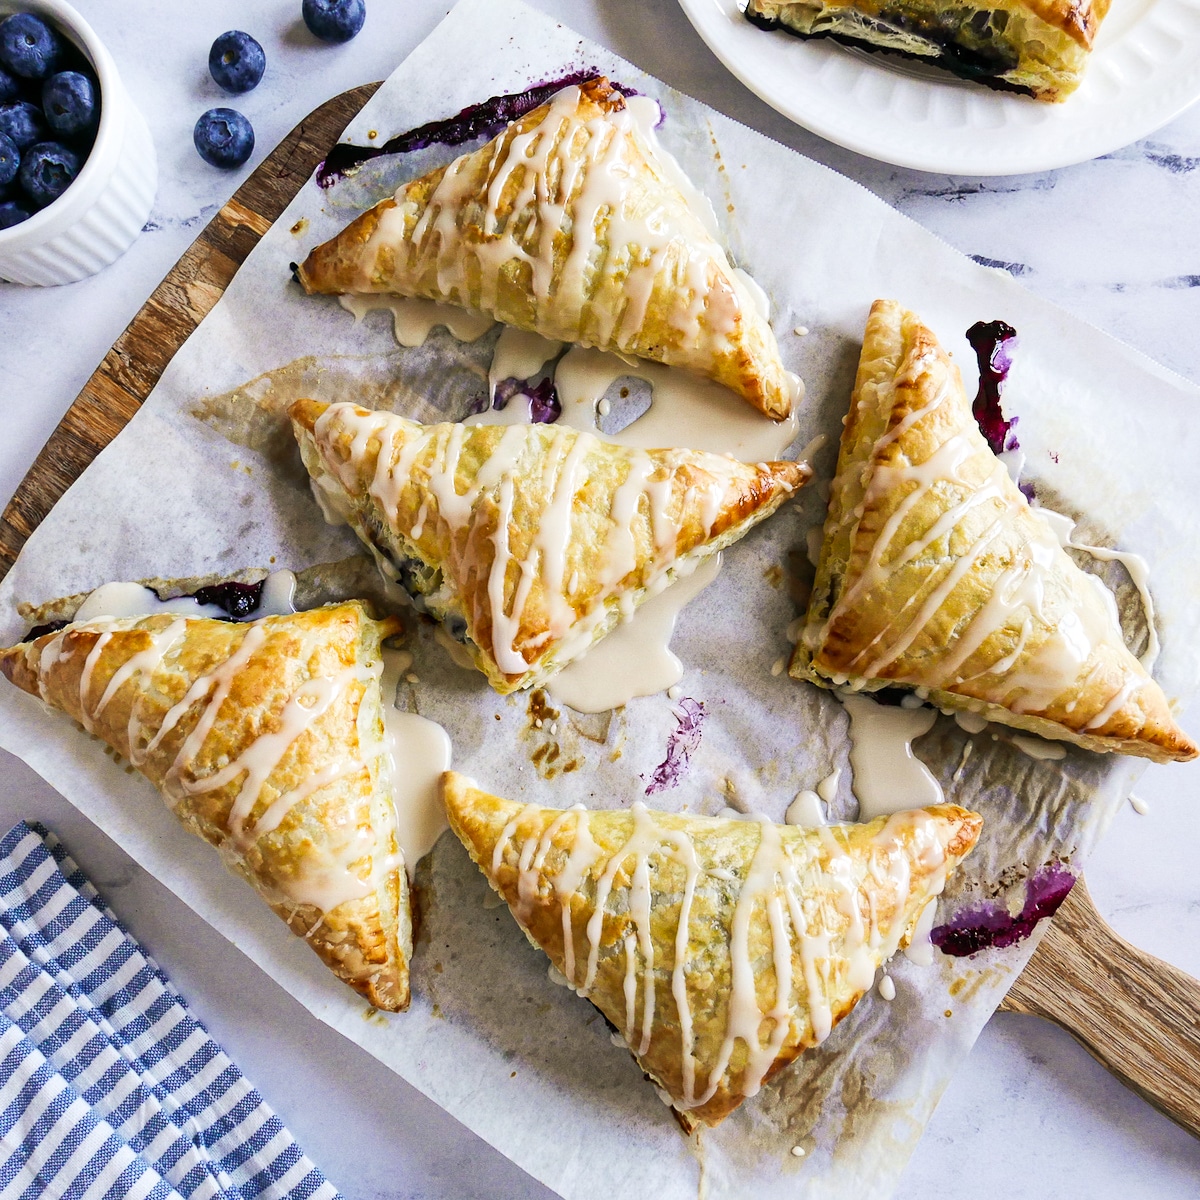 Glazed puff pastry turnovers arranged on parchment paper.